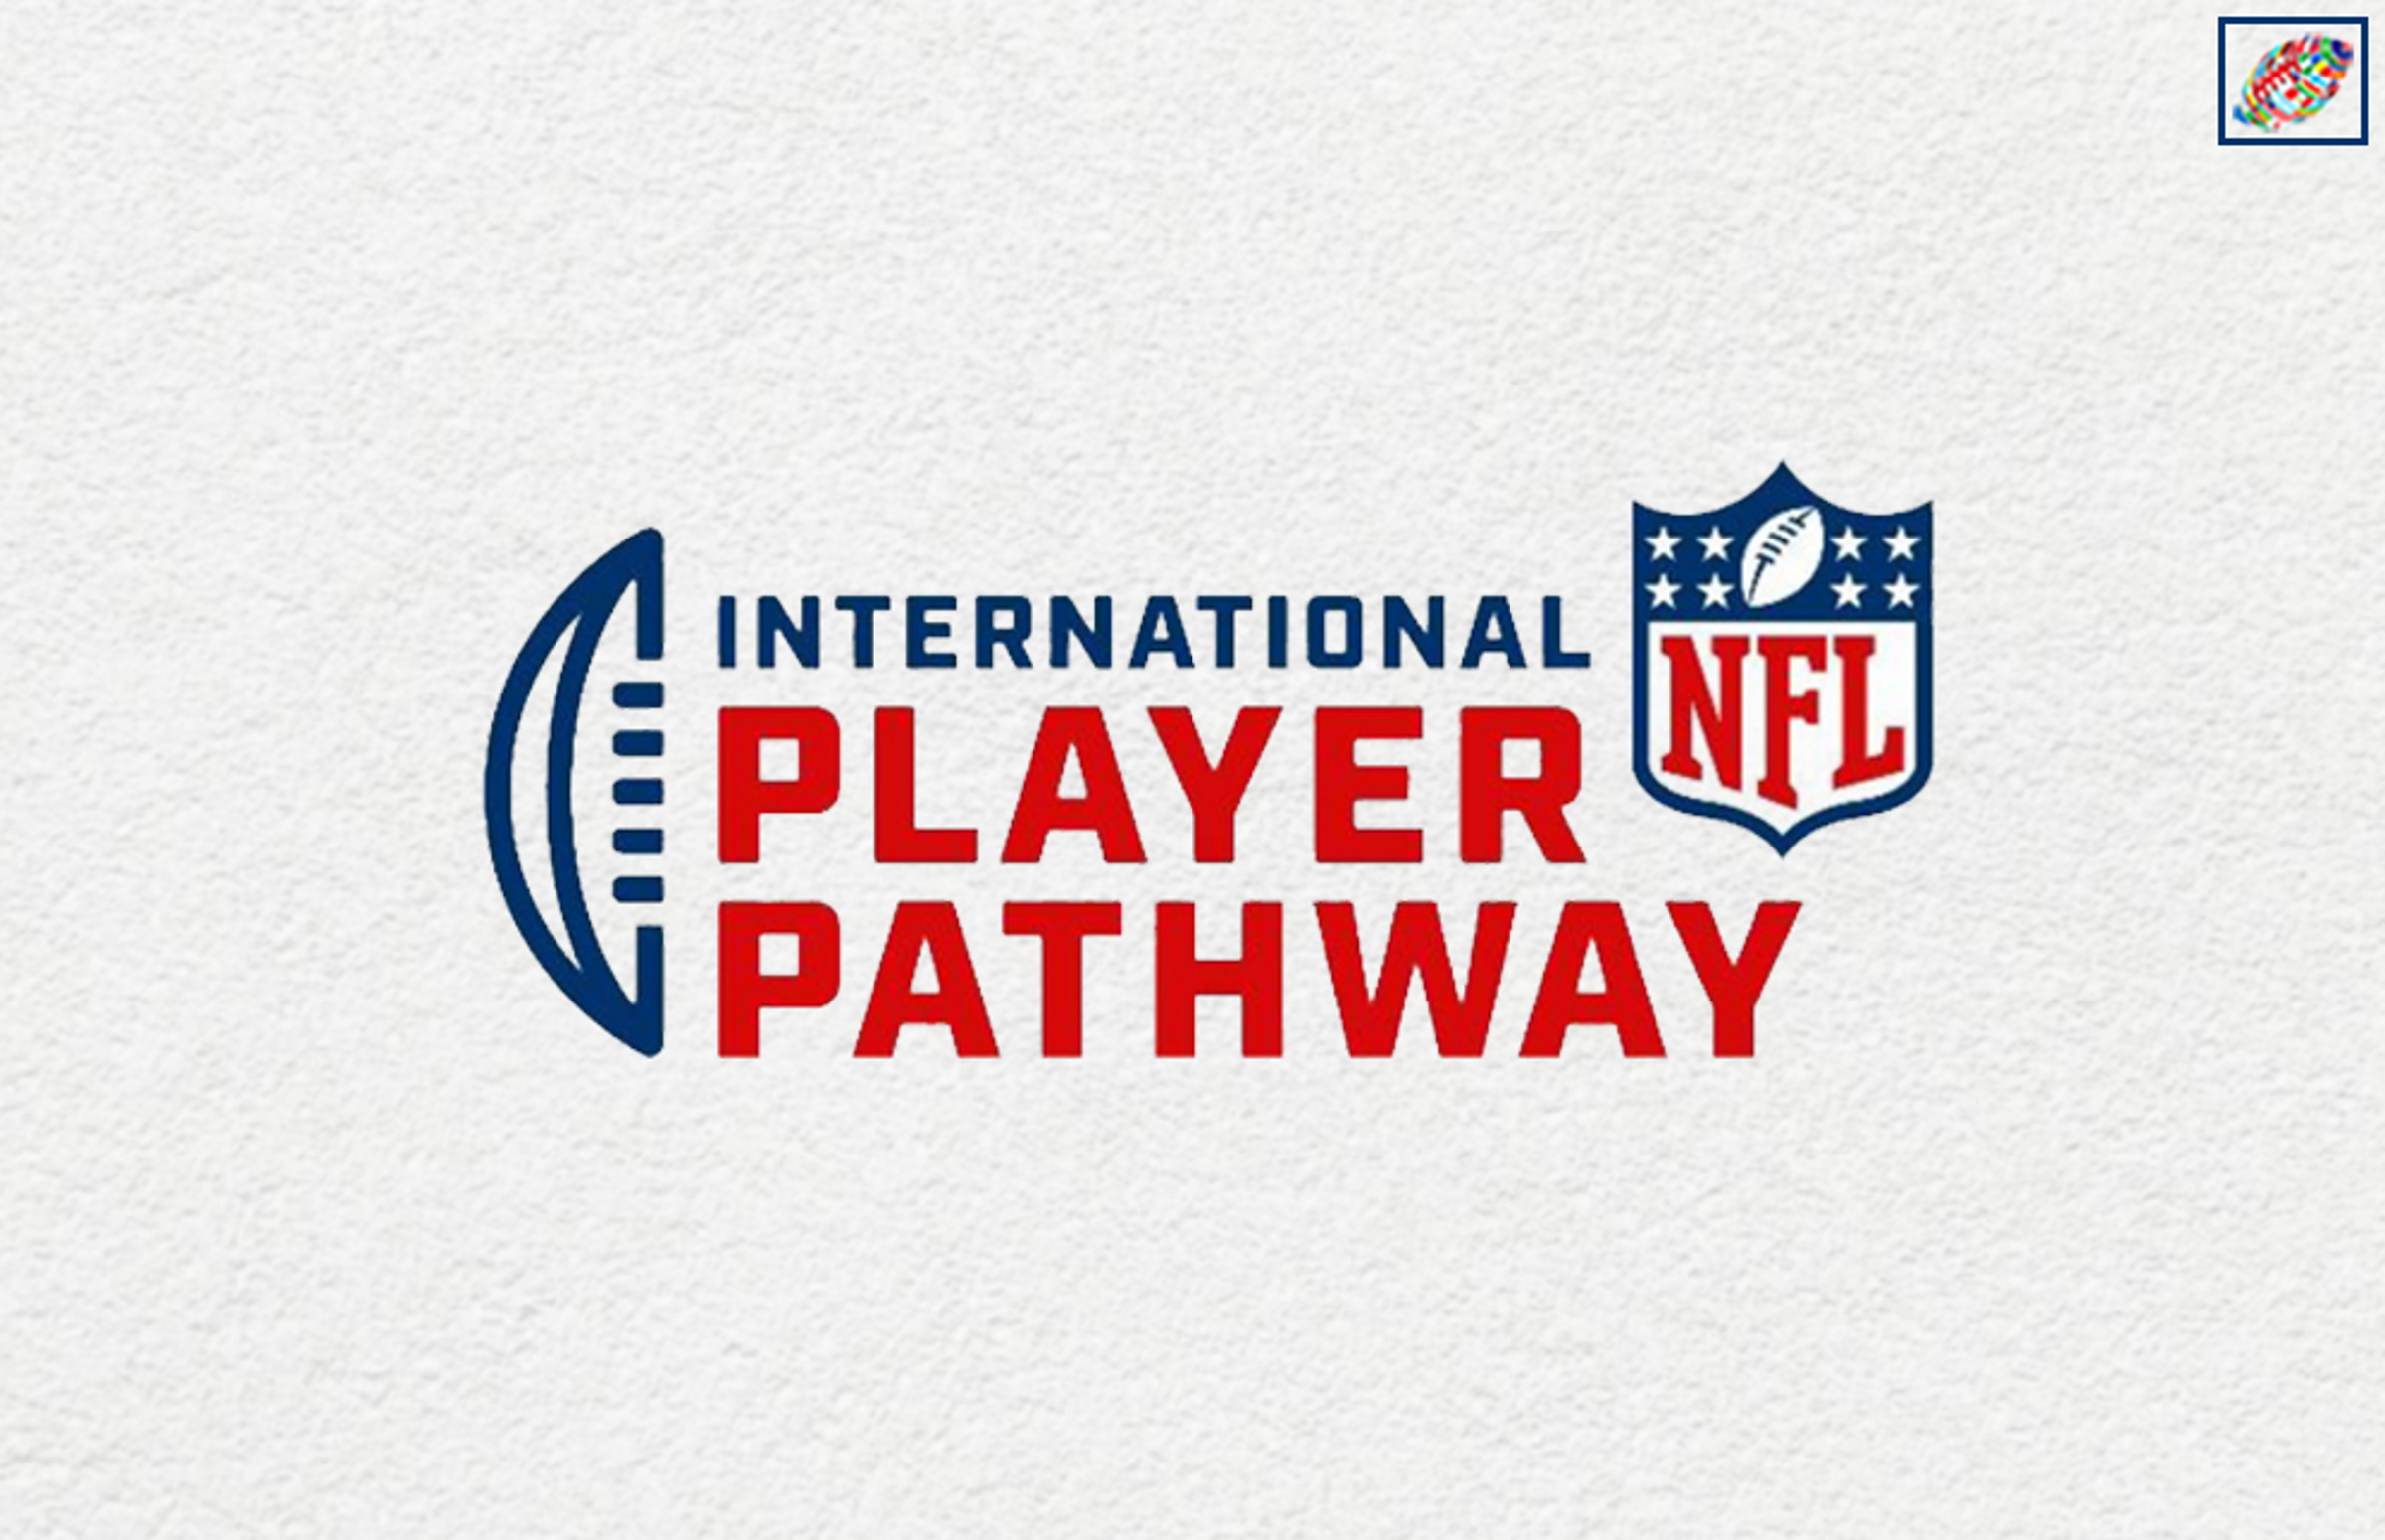 Players from 9 countries picked to compete for a spot in the 2022 NFL